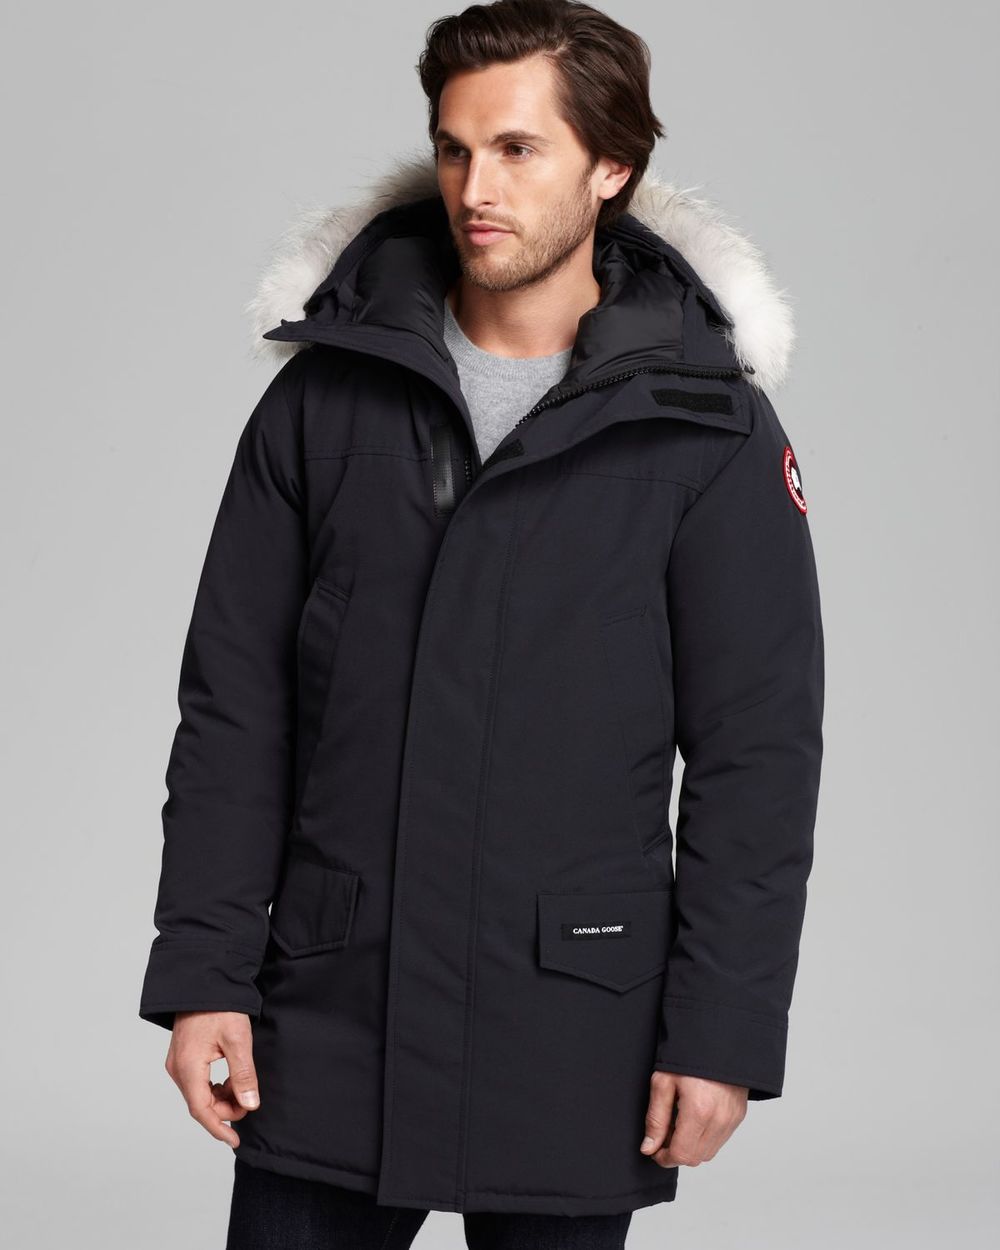 Canada Goose cheap - 9 Canada Goose Alternatives To Fit Every Budget �� AS RAKESTRAW ...